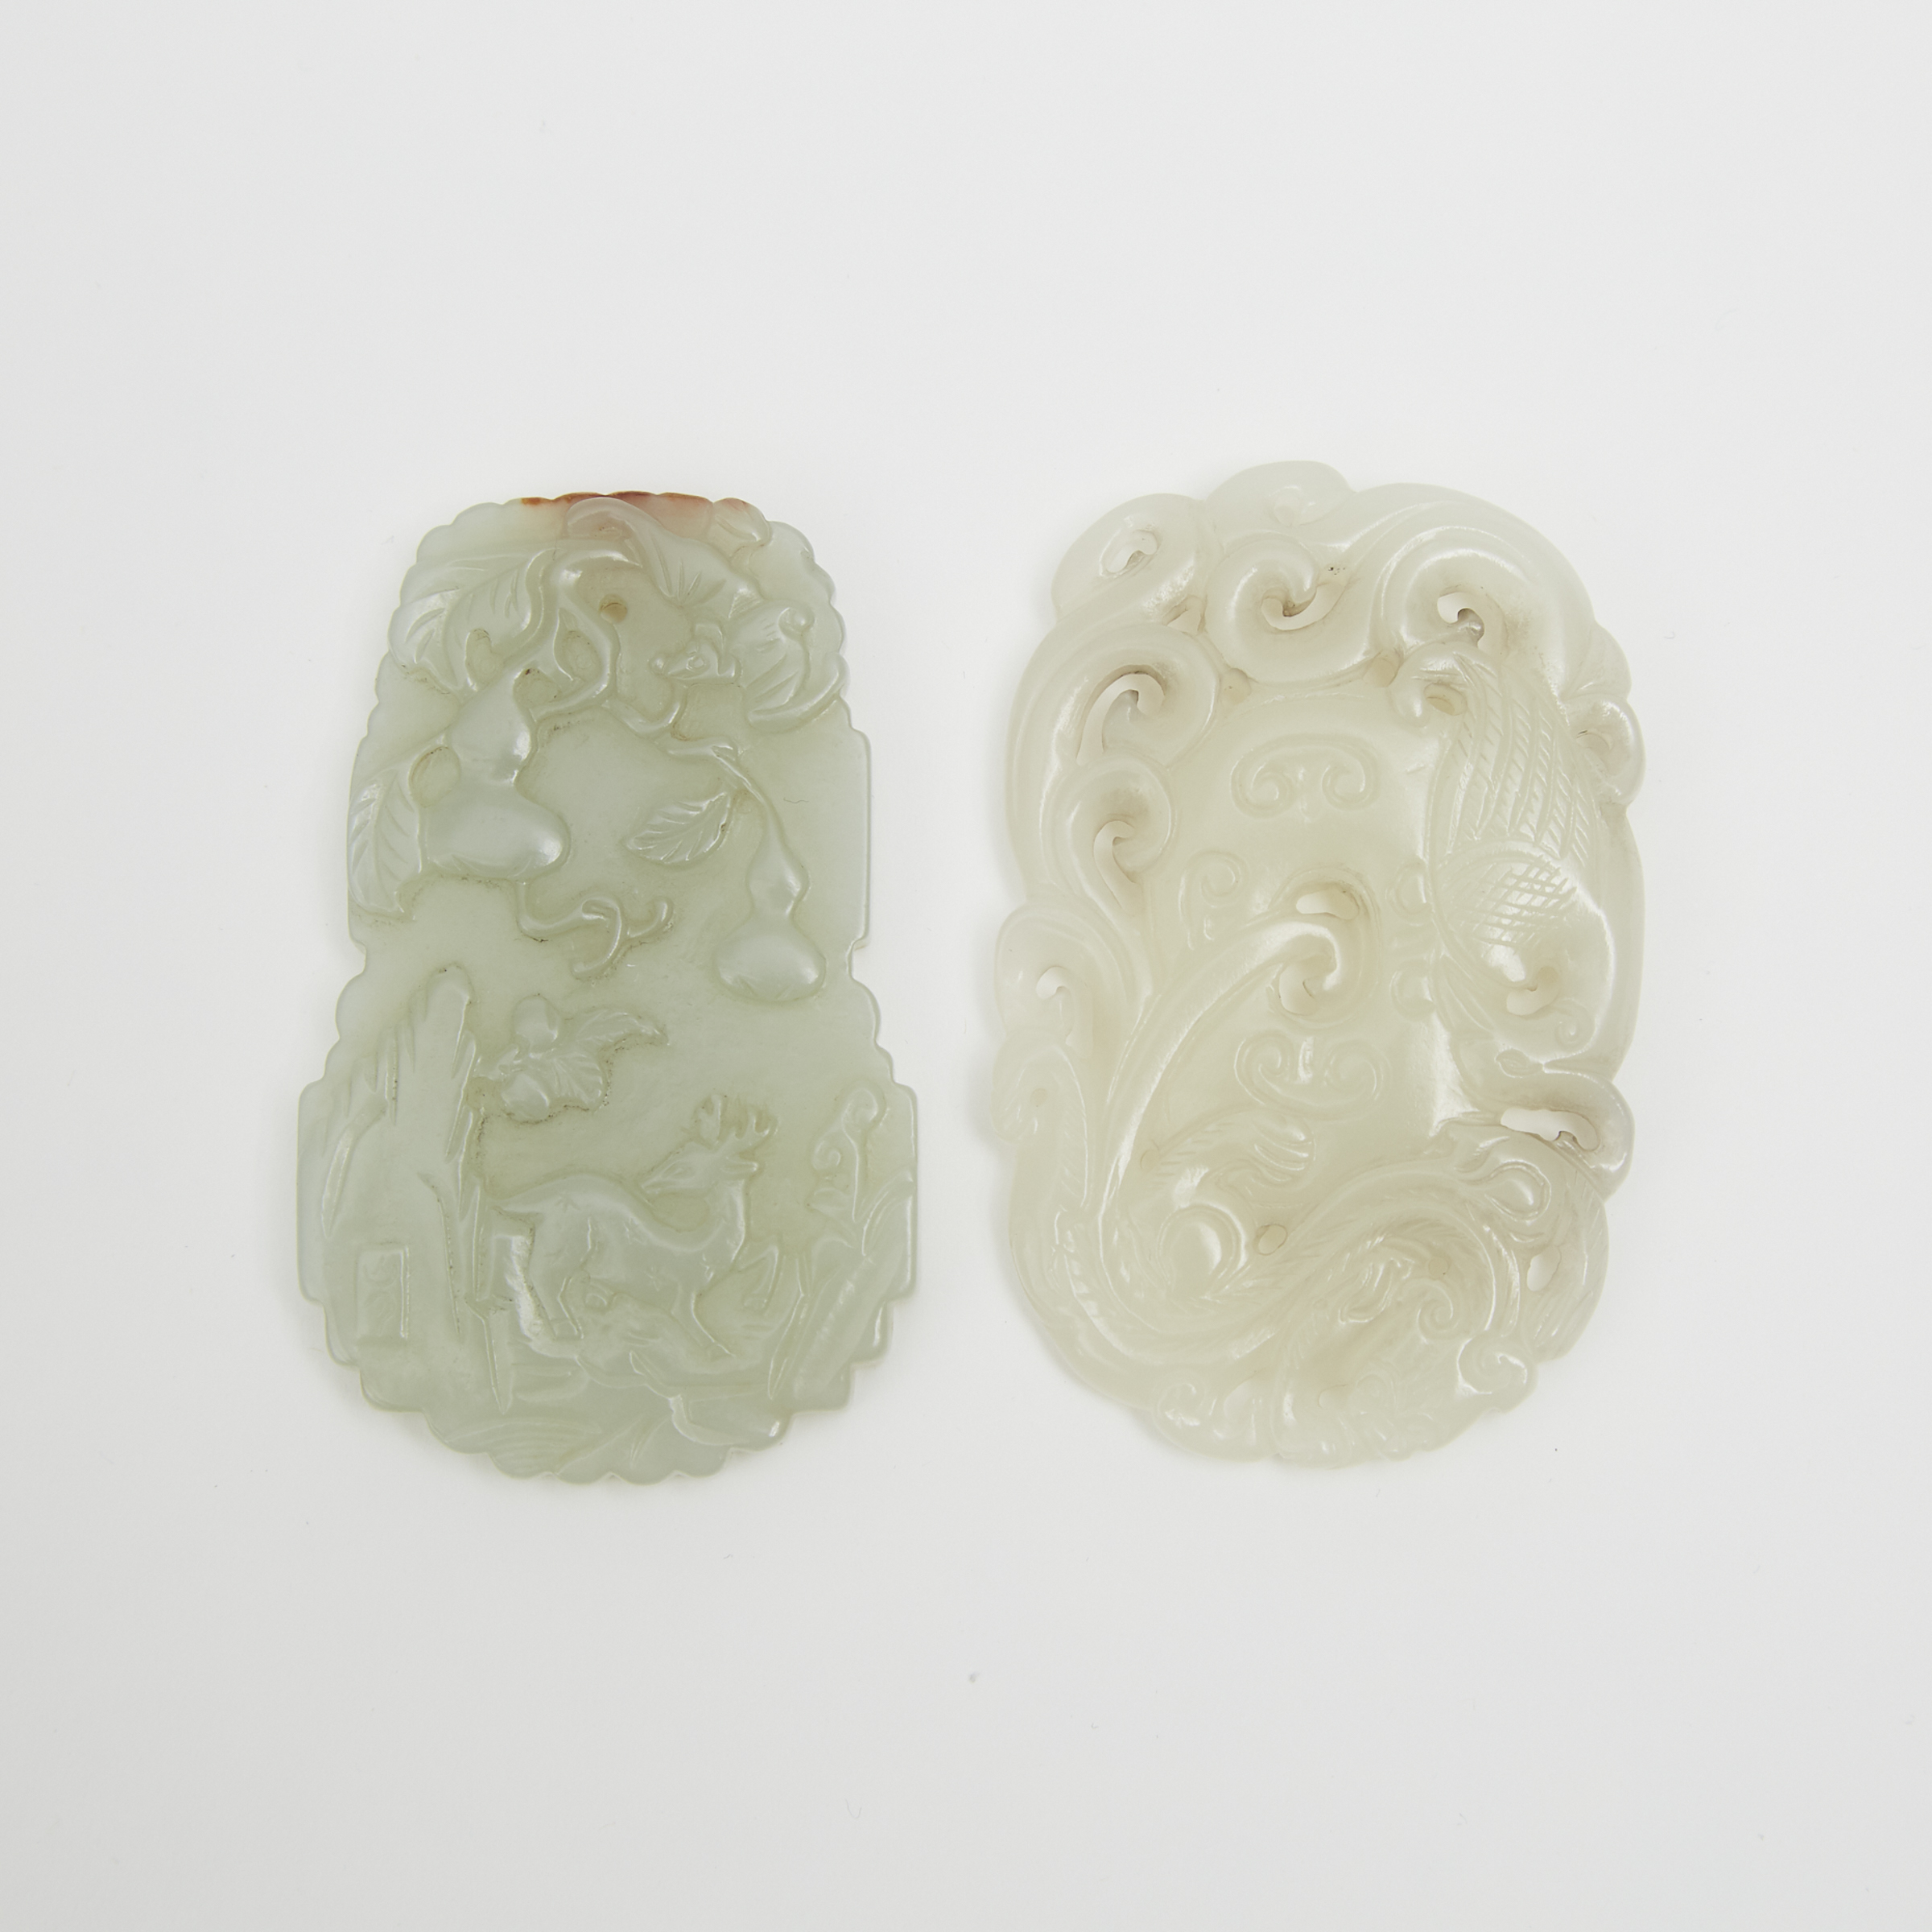 A White Jade 'Dragon and Egret' Plaque and a Pale Celadon Jade 'Deer and Gourd' Pendant